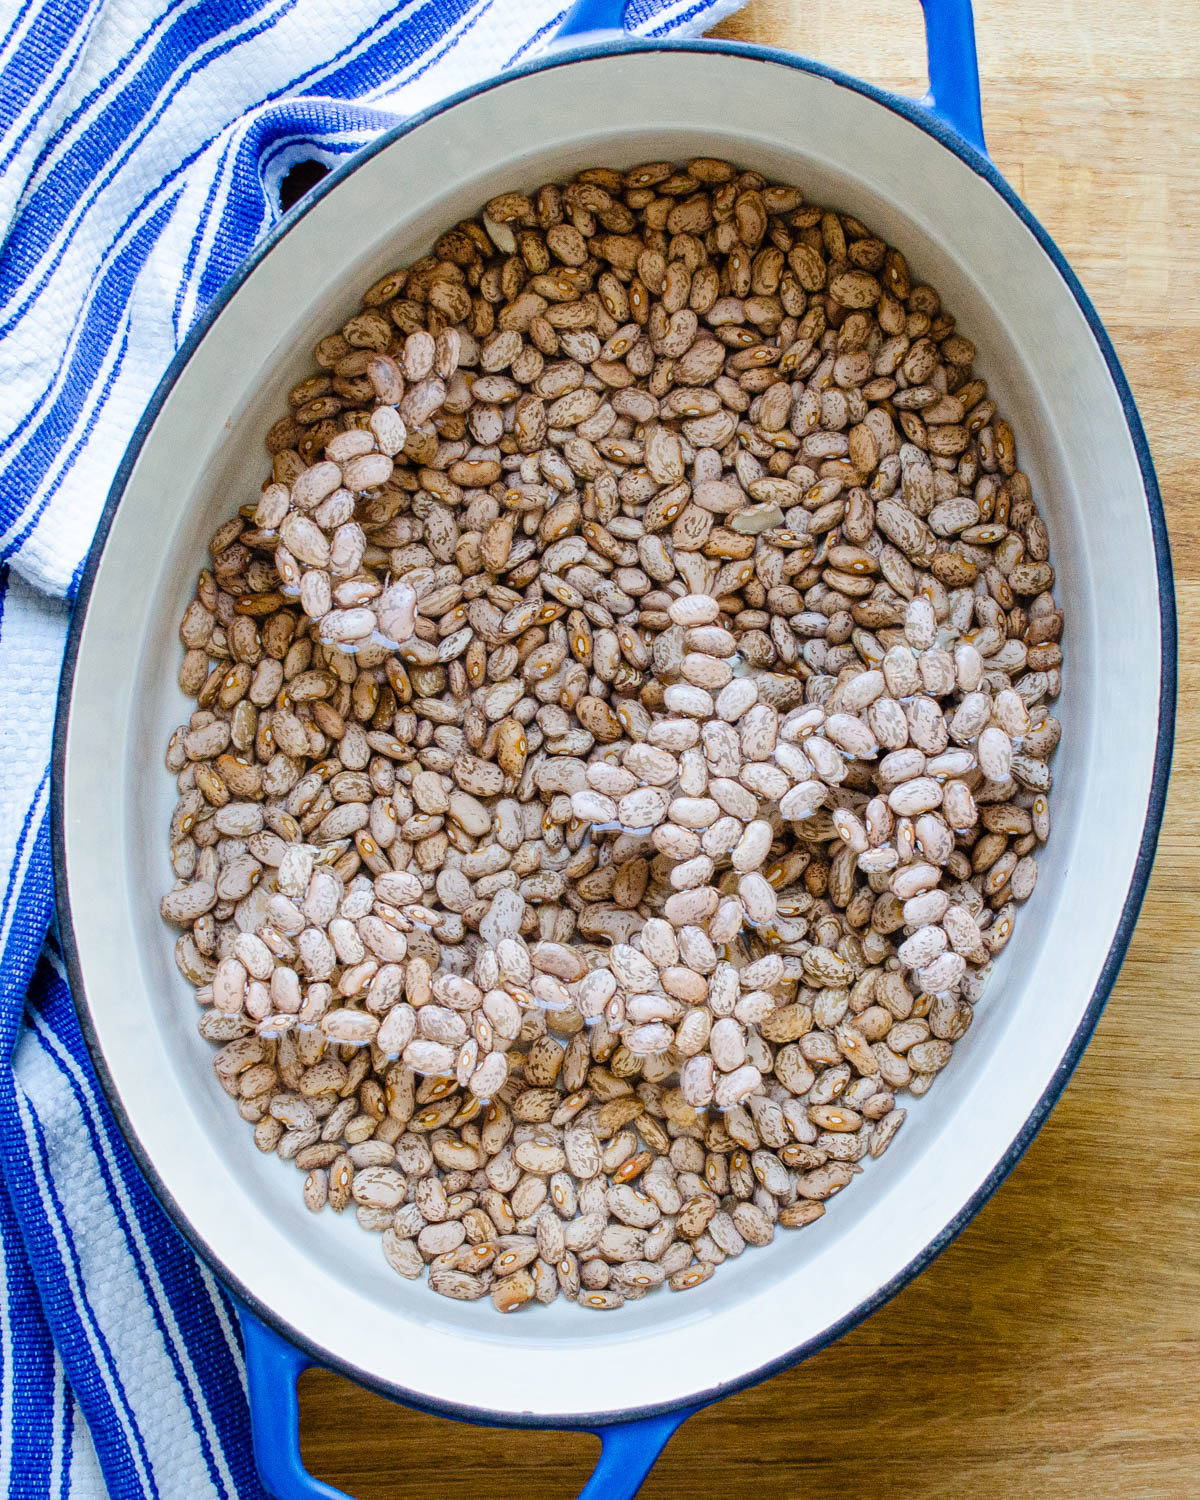 Soaking dried pinto beans in water.